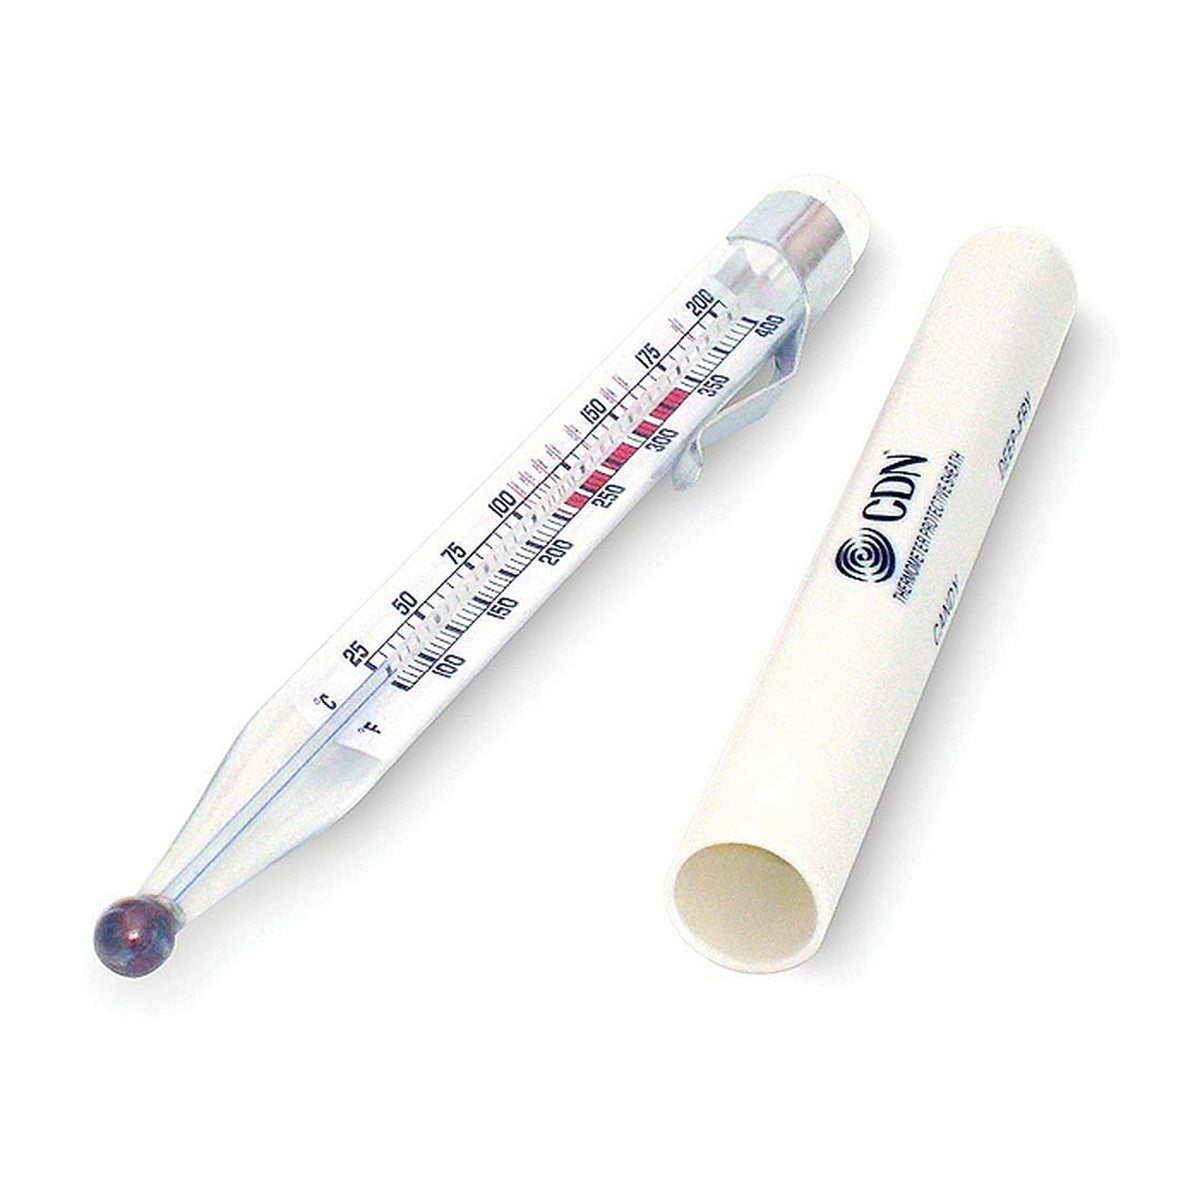 CDN Chocolate Tempering Thermometer - Spoons N Spice